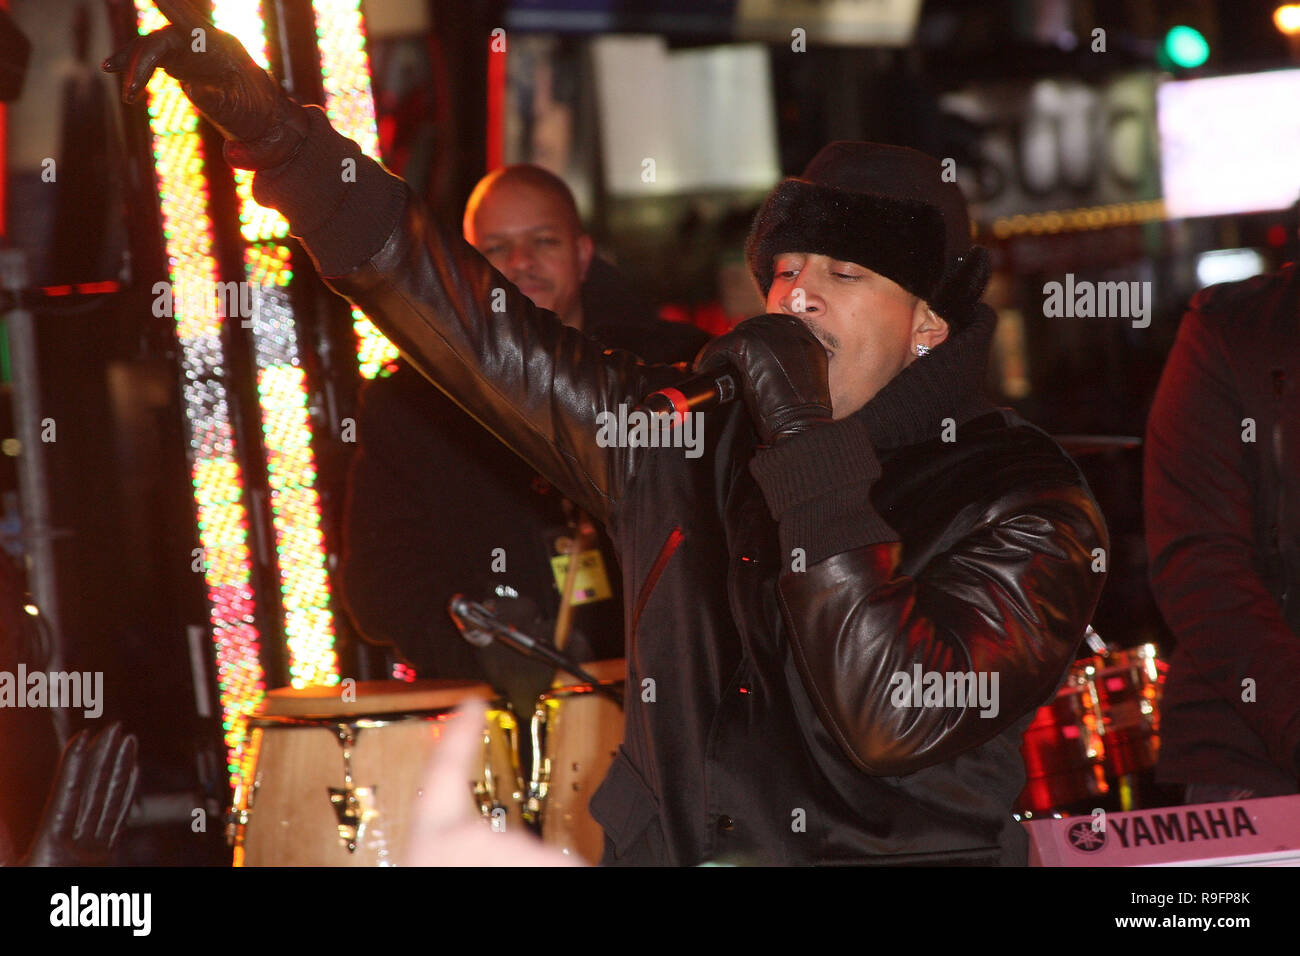 NEW YORK - DECEMBER 31:  Ludacris performs on stage at the ceremony to lower the New Years Eve ball in Times Square on December 31, 2008 in New York City.  (Photo by Steve Mack/S.D. Mack Pictures) Stock Photo